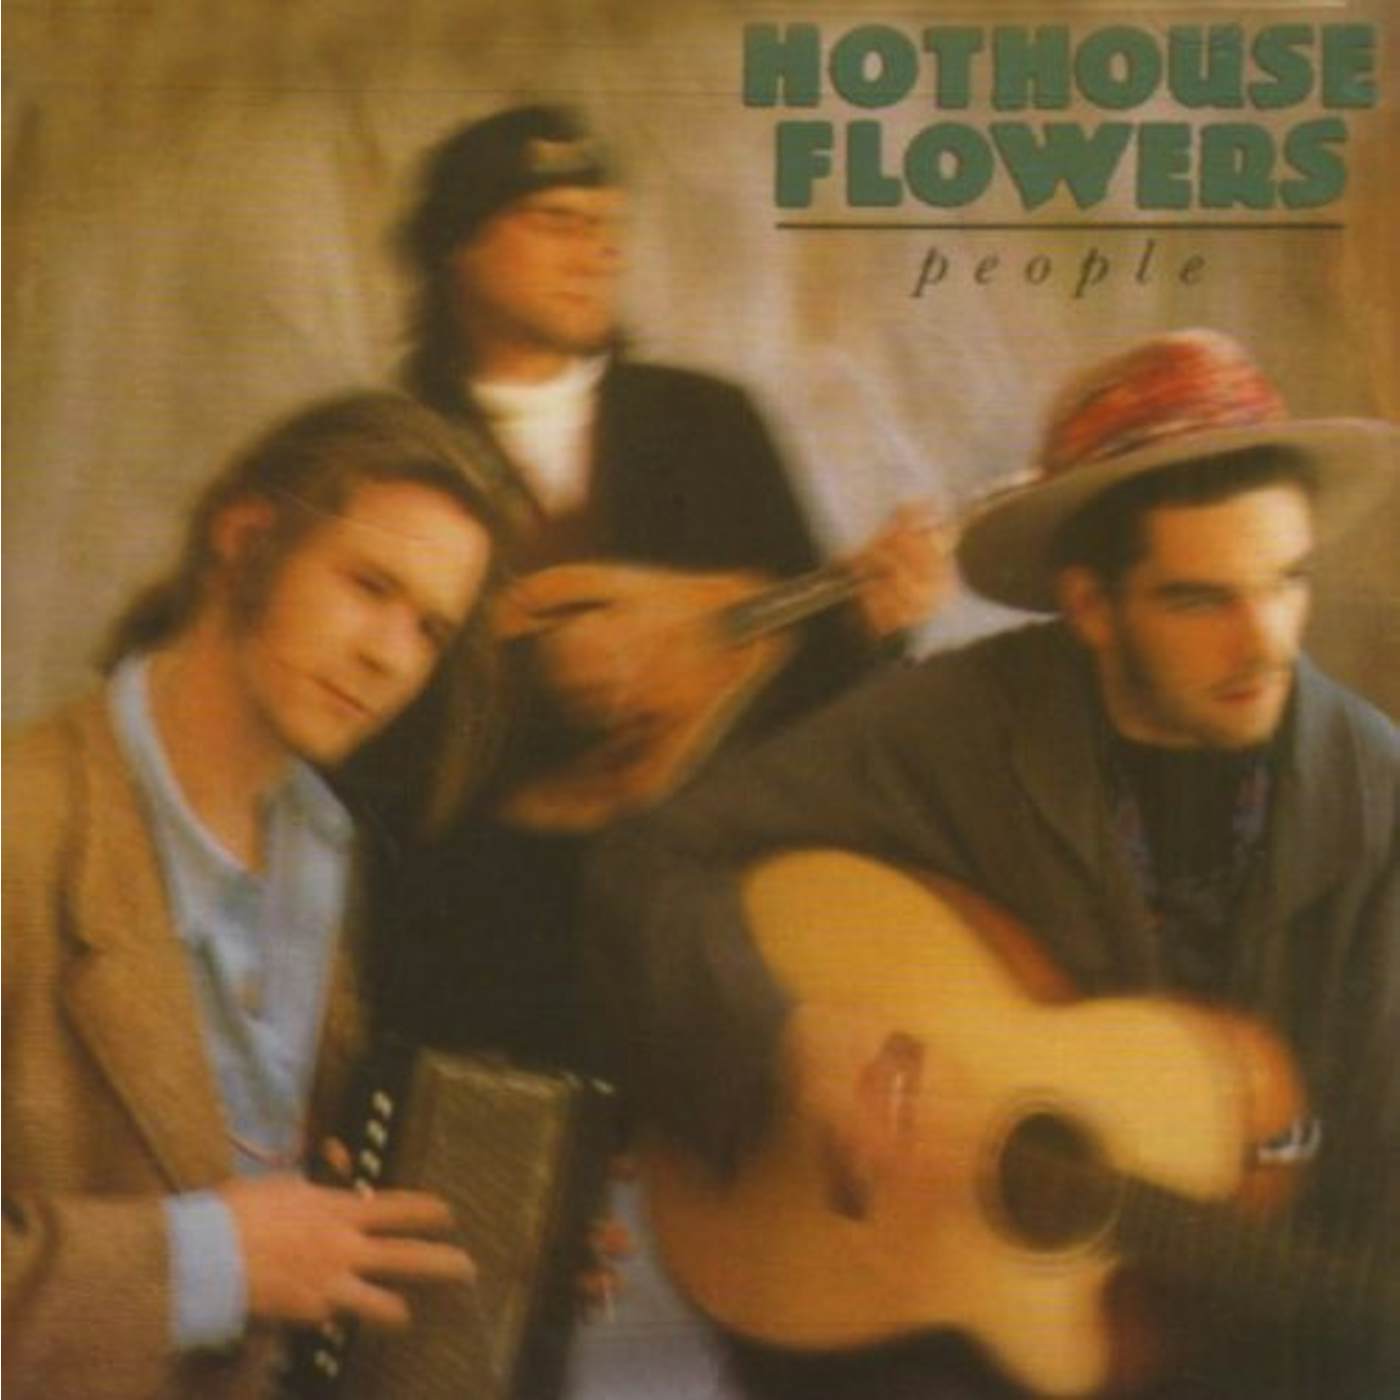 Hothouse Flowers PEOPLE CD